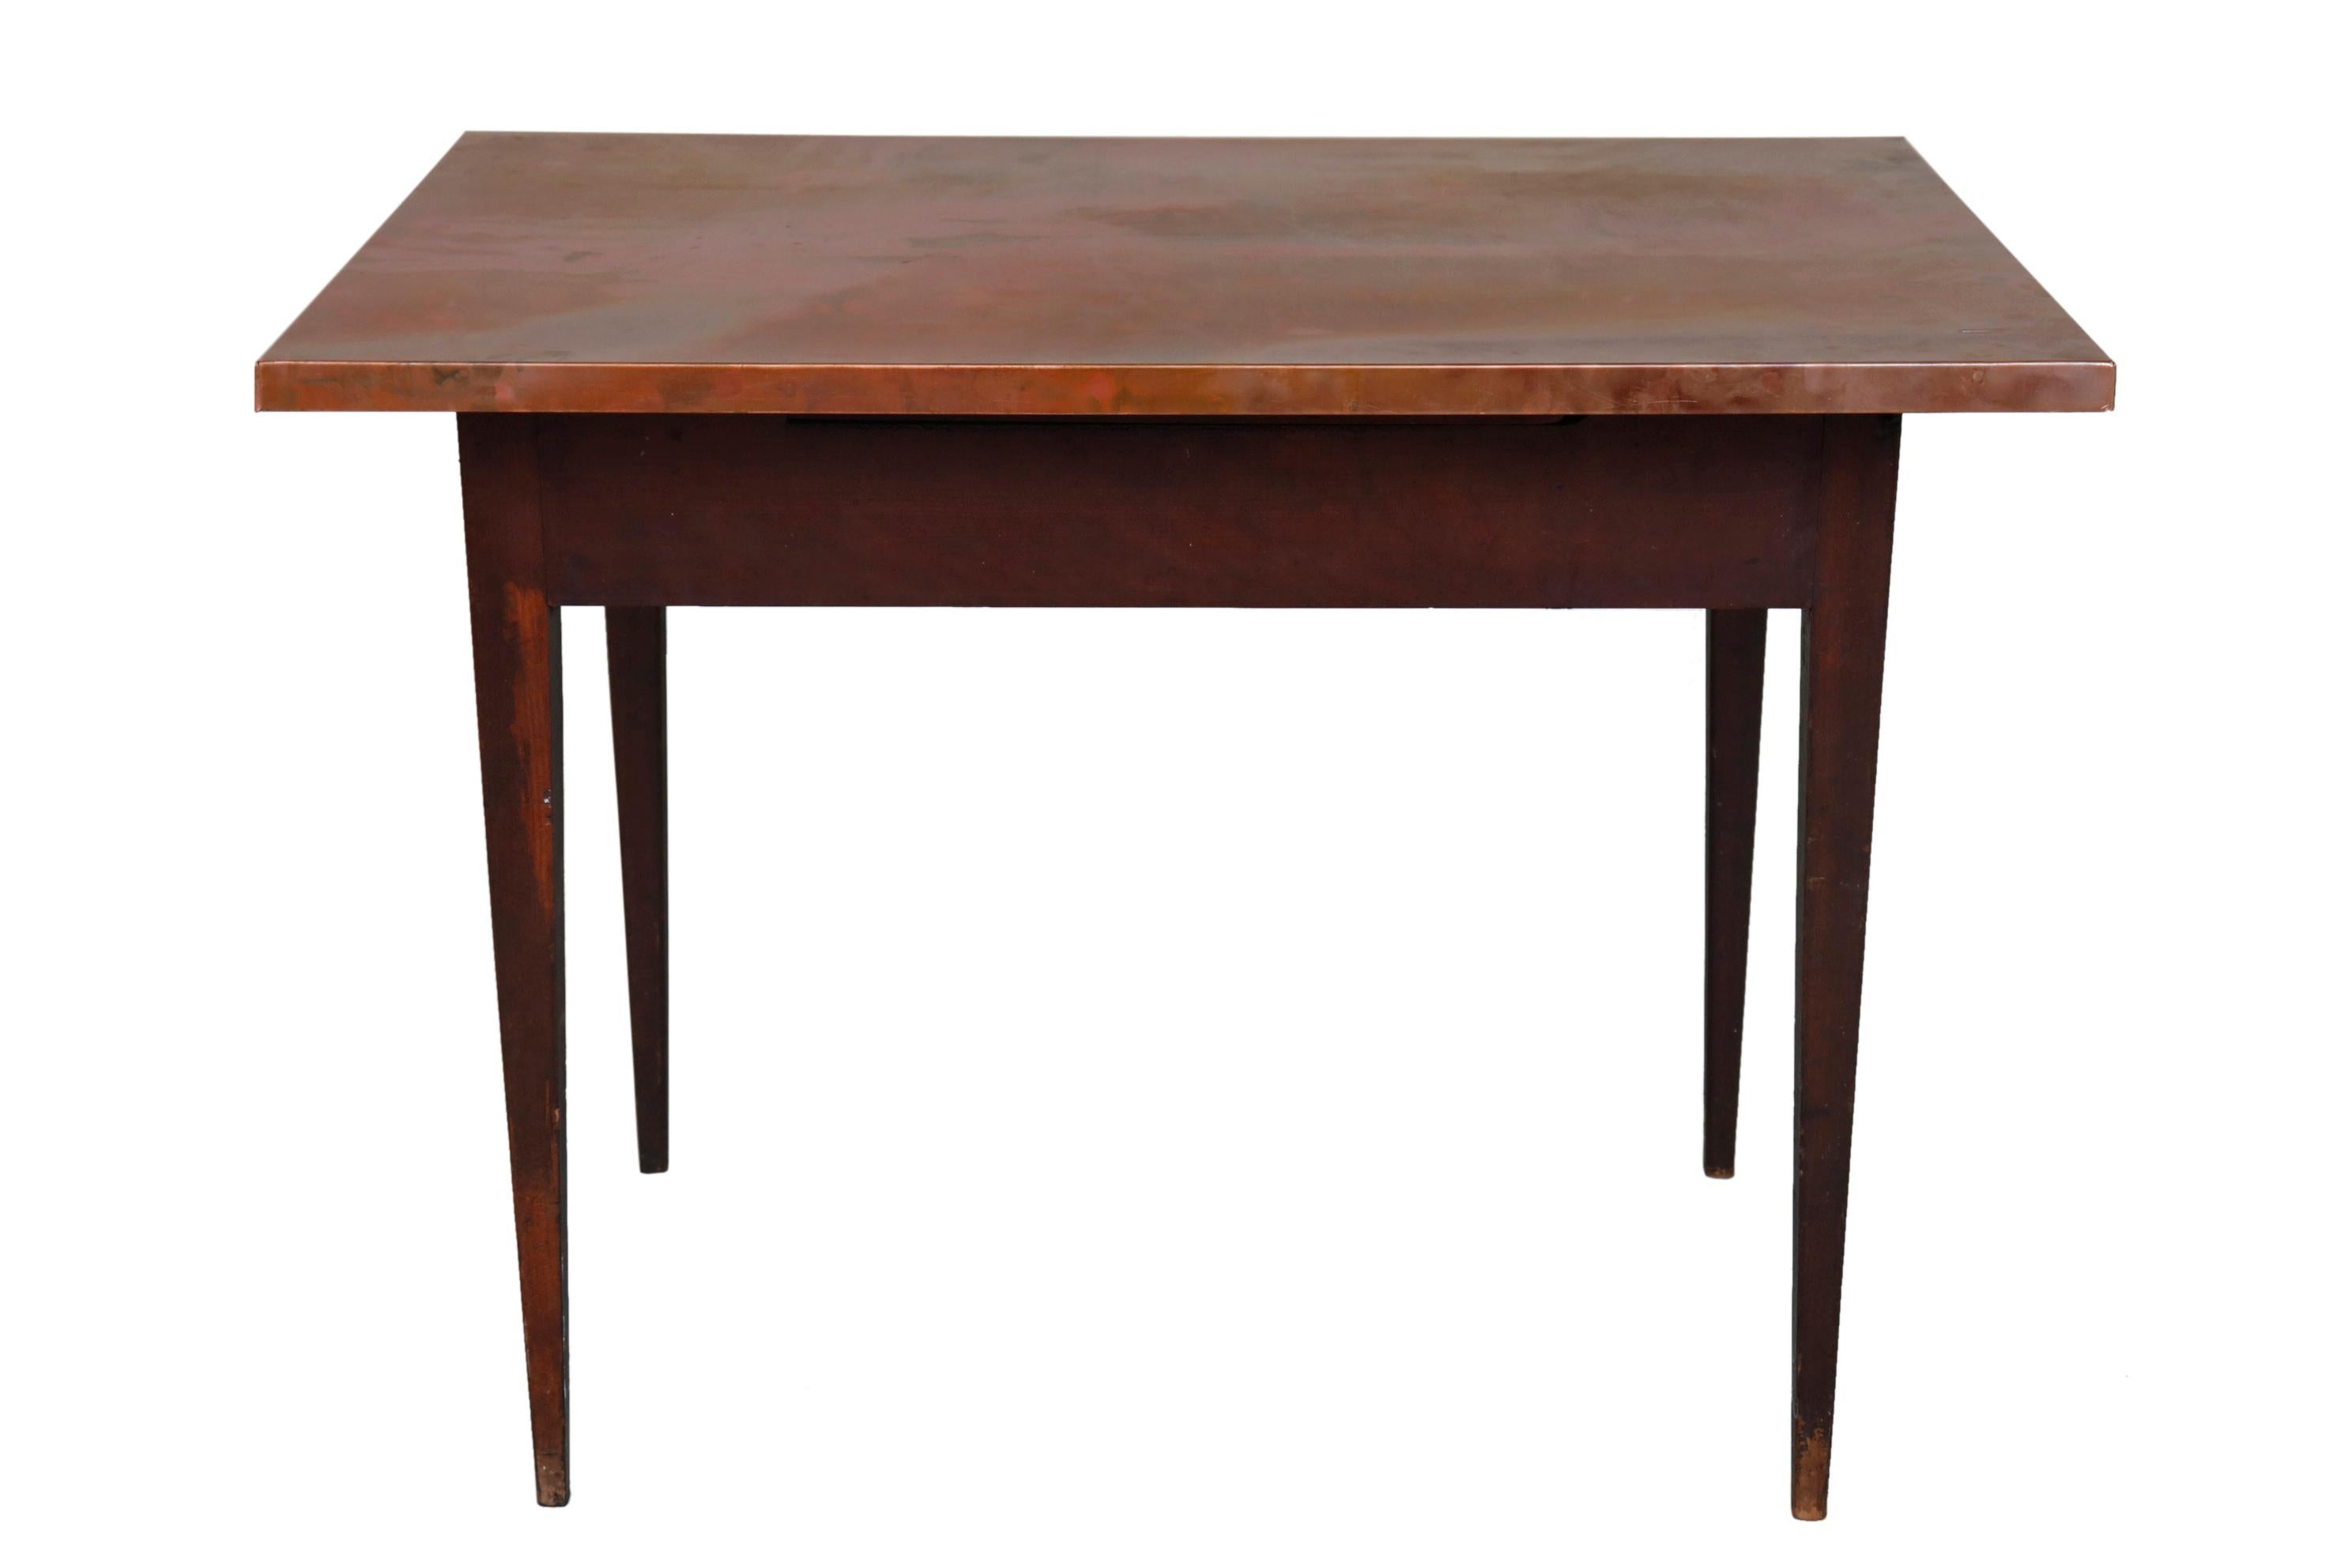 Spare and elegant lines, with original wooden base finish. Copper top has been created for the table.